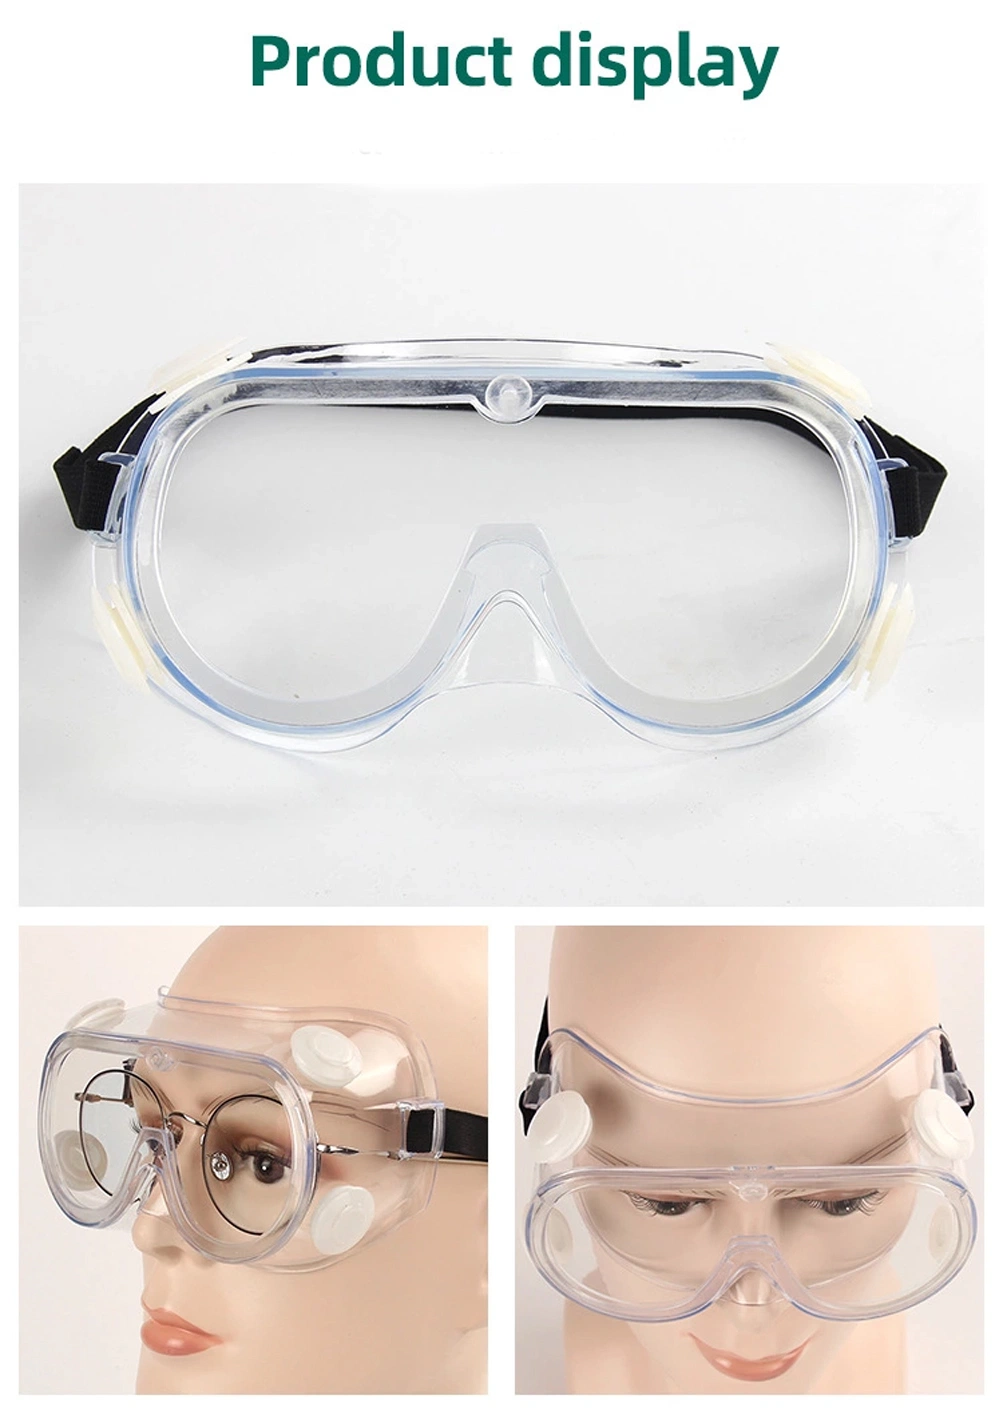 Personal Industril Reusable Spray Proof Saliva Safety Glasses Protective Eyeglasses